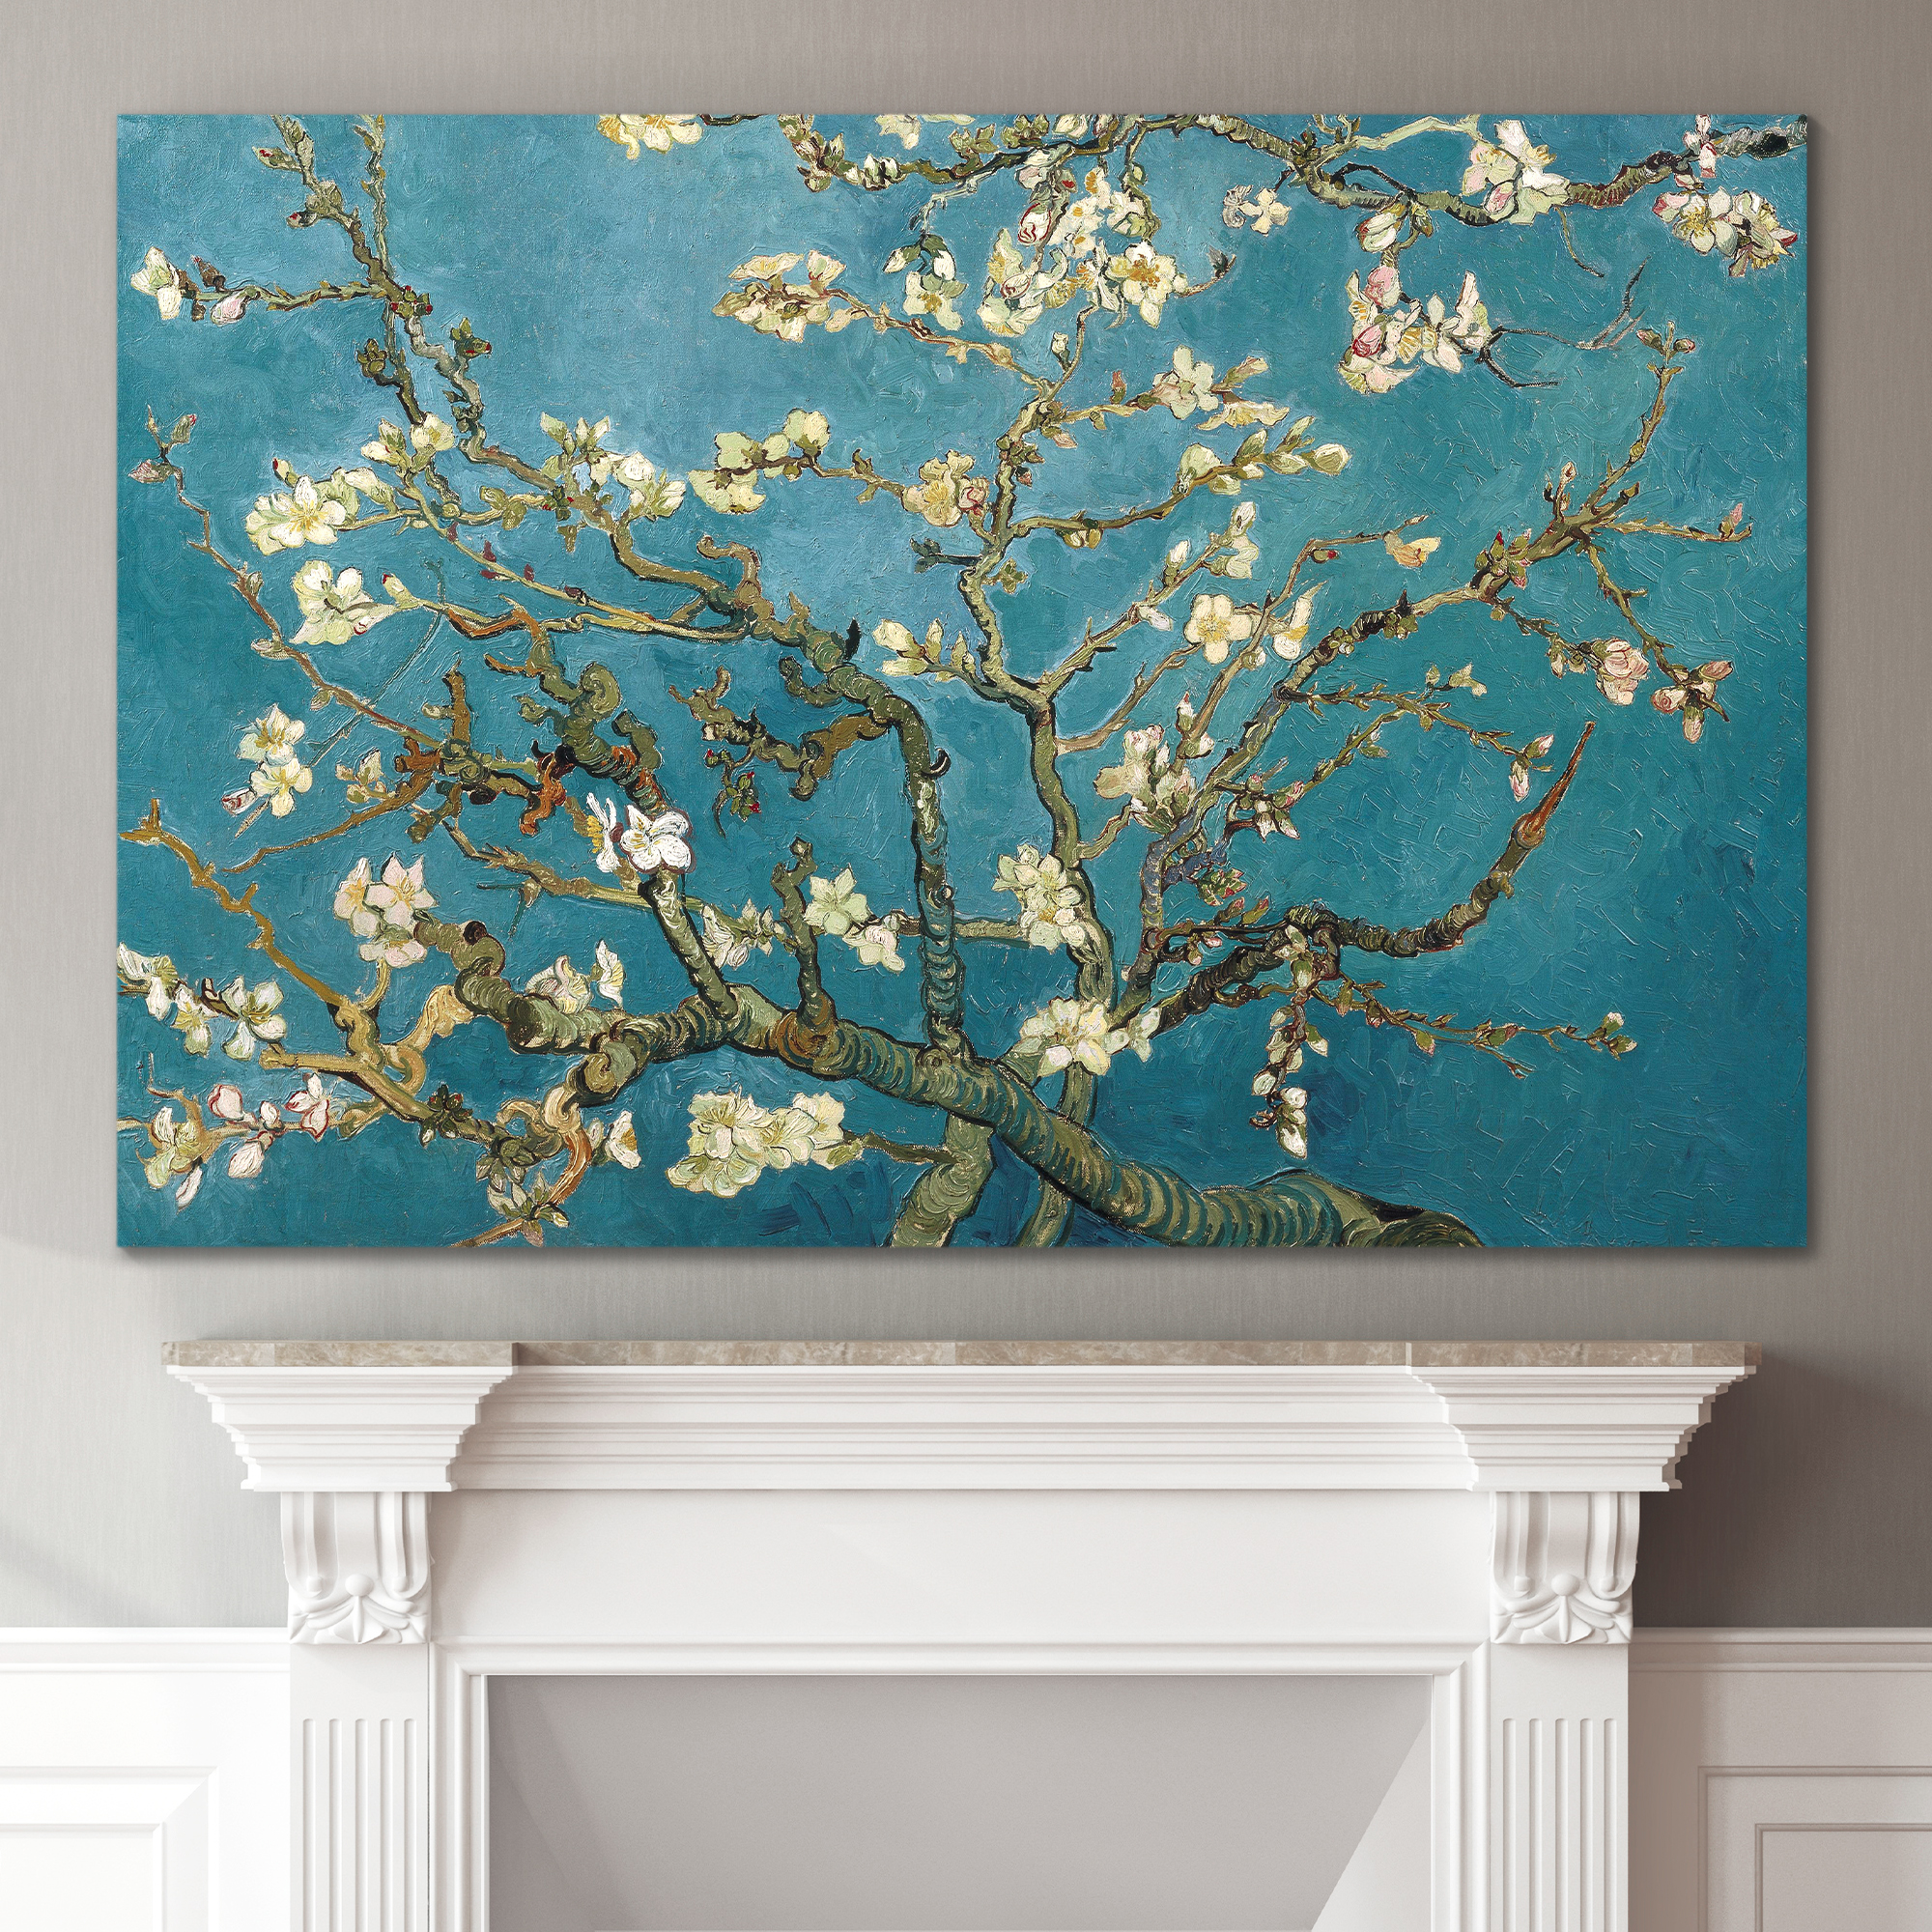 Canvas Print Wall Art - Almond Blossoms by Vincent Van Gogh Reproduction on Canvas Stretched Gallery Wrap. Ready to Hang -24